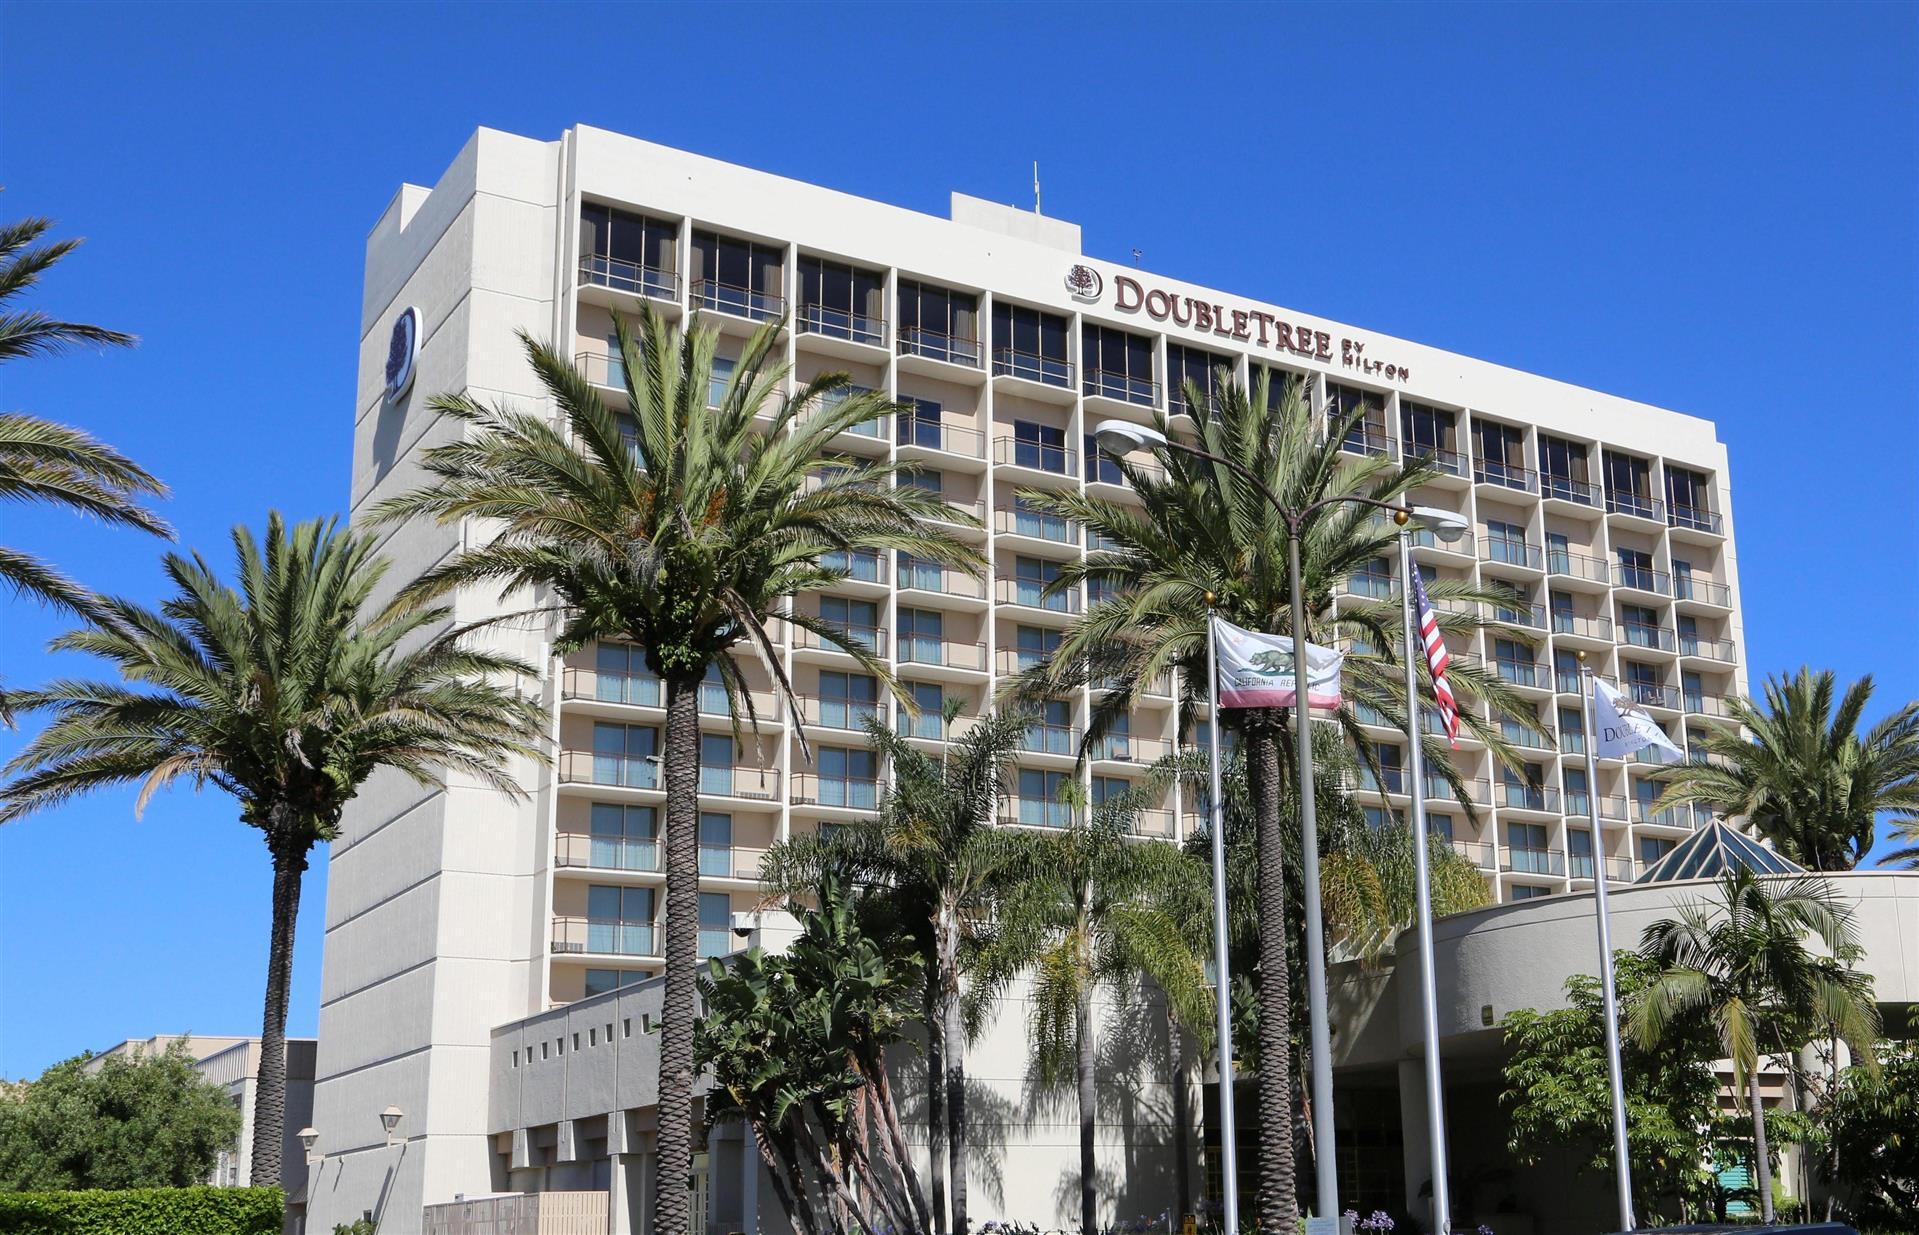 DoubleTree by Hilton Hotel Torrance - South Bay in Torrance, CA